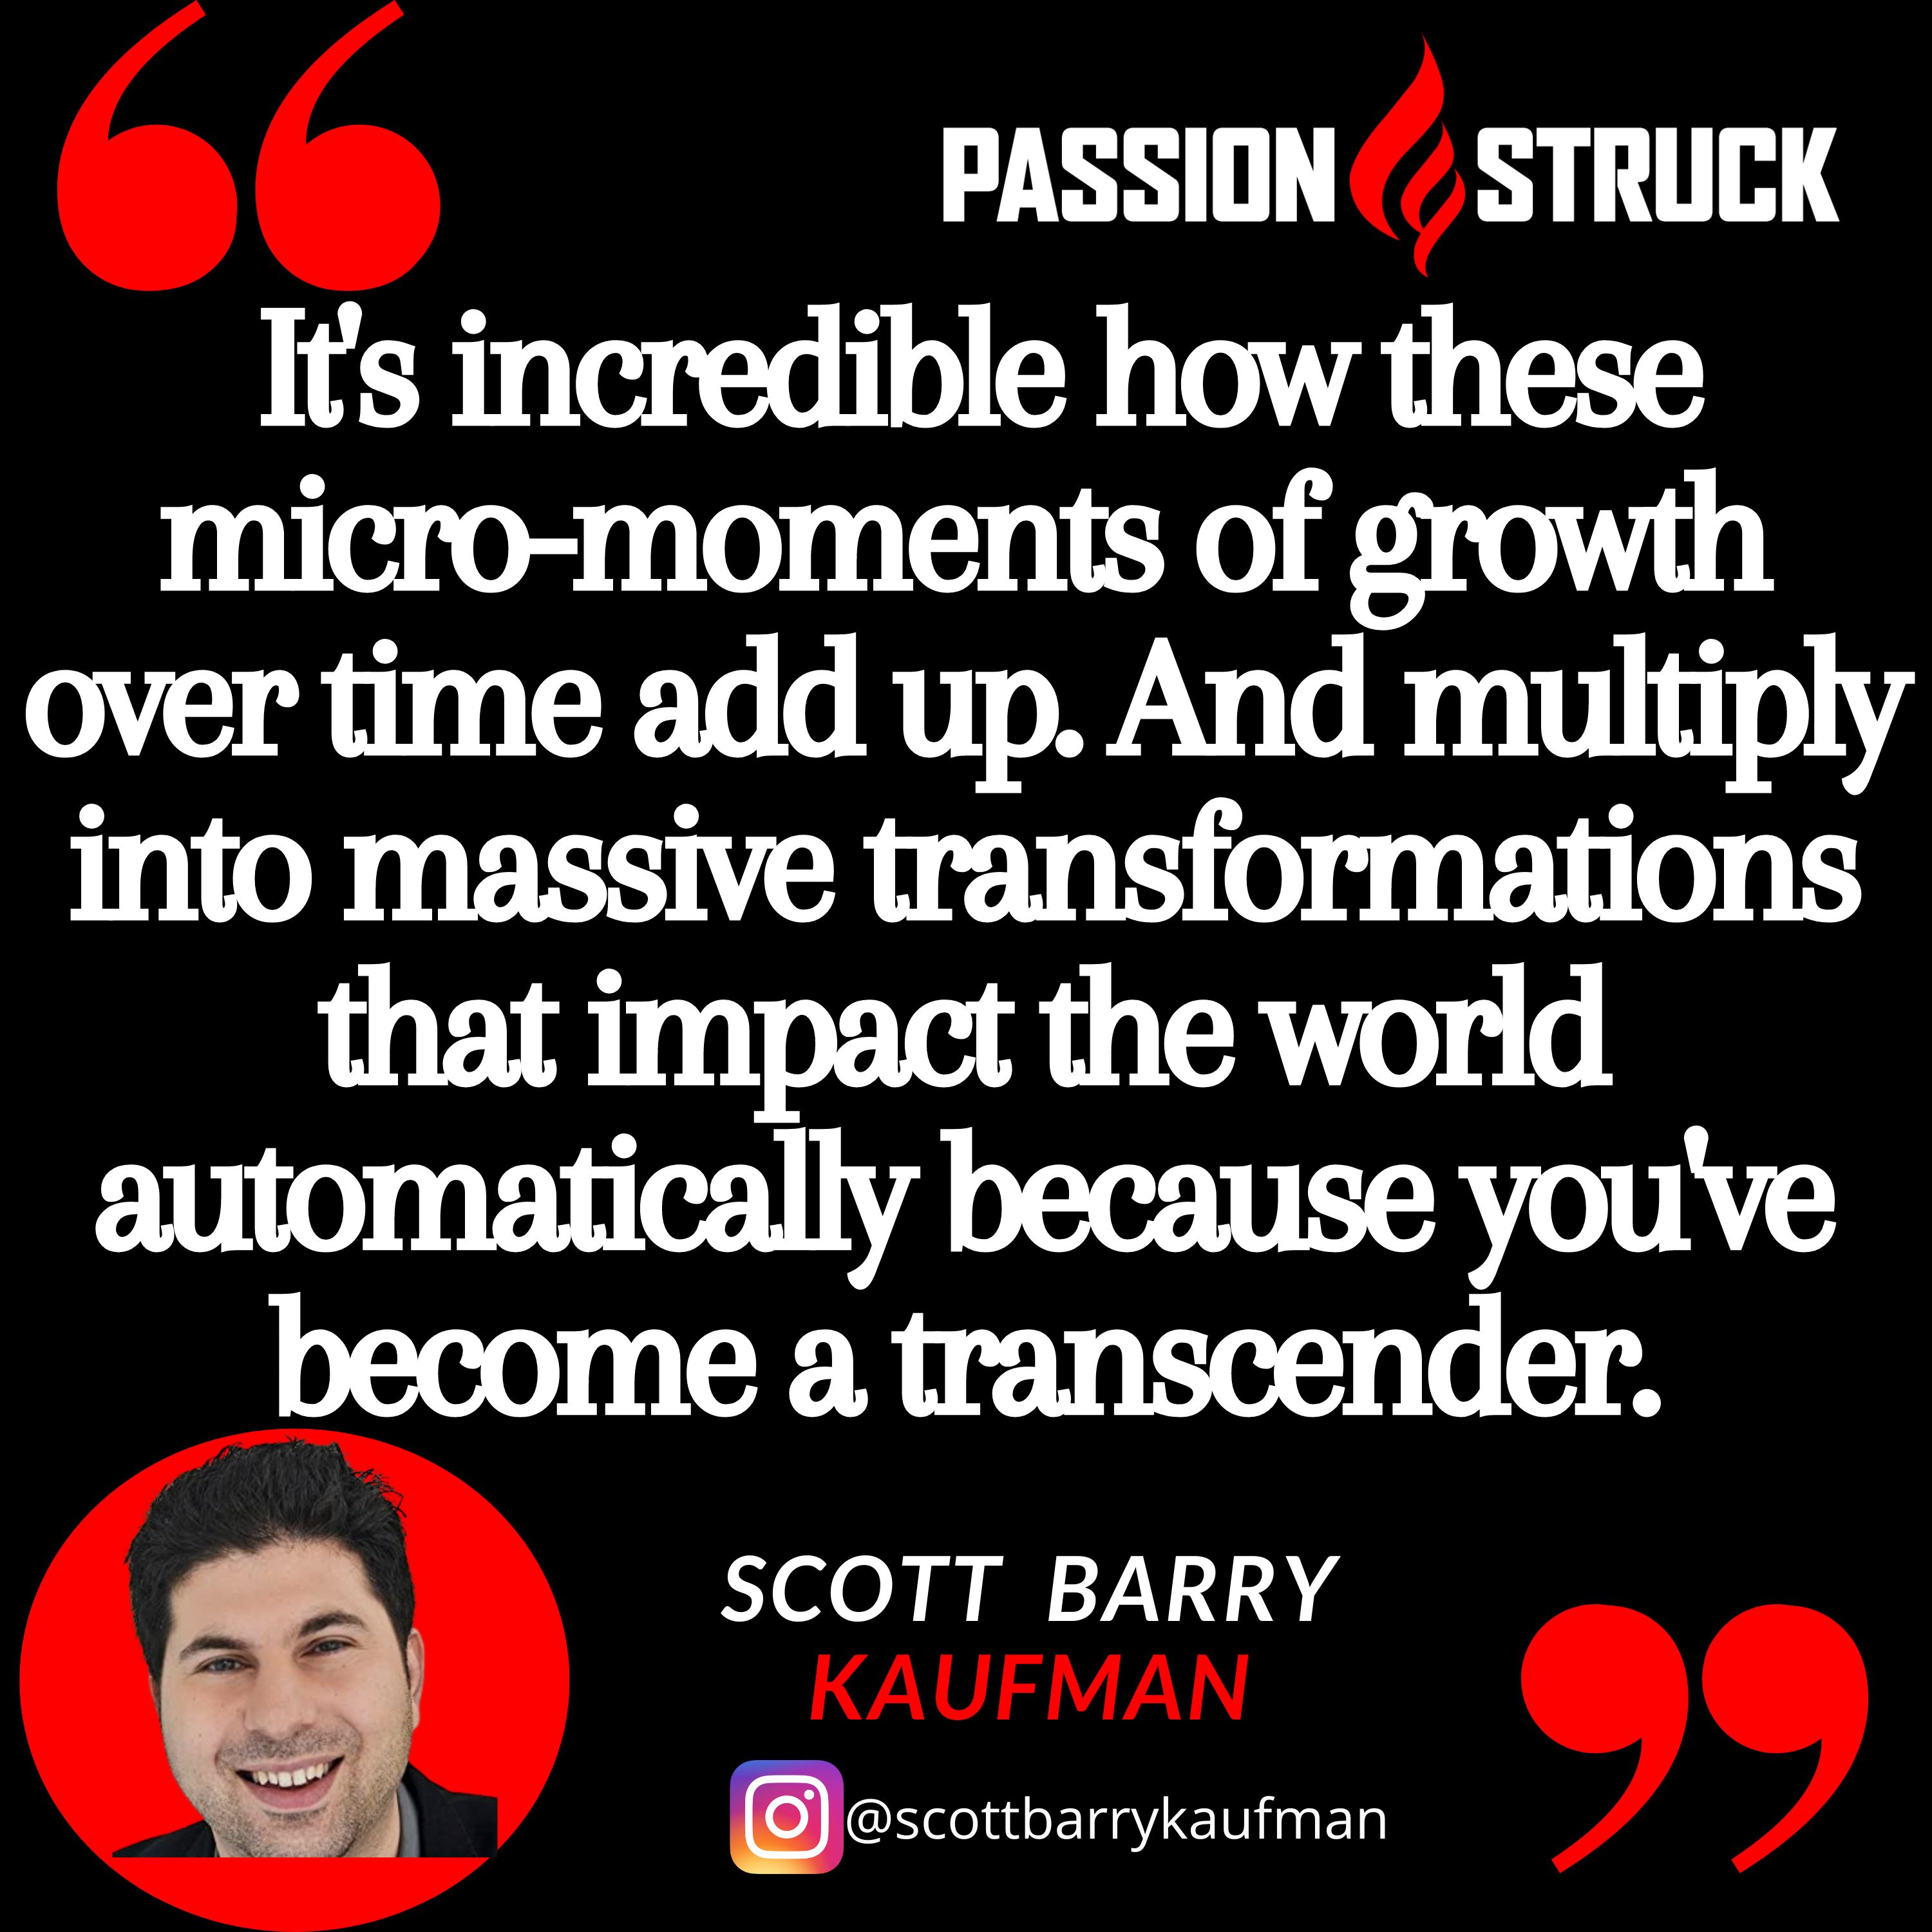 Quote from Scott Barry Kaufman from the Passion Struck podcast:  It's incredible how these micro-moments of growth over time add up. And multiply into massive transformations that impact the world automatically because you've become a transcender.